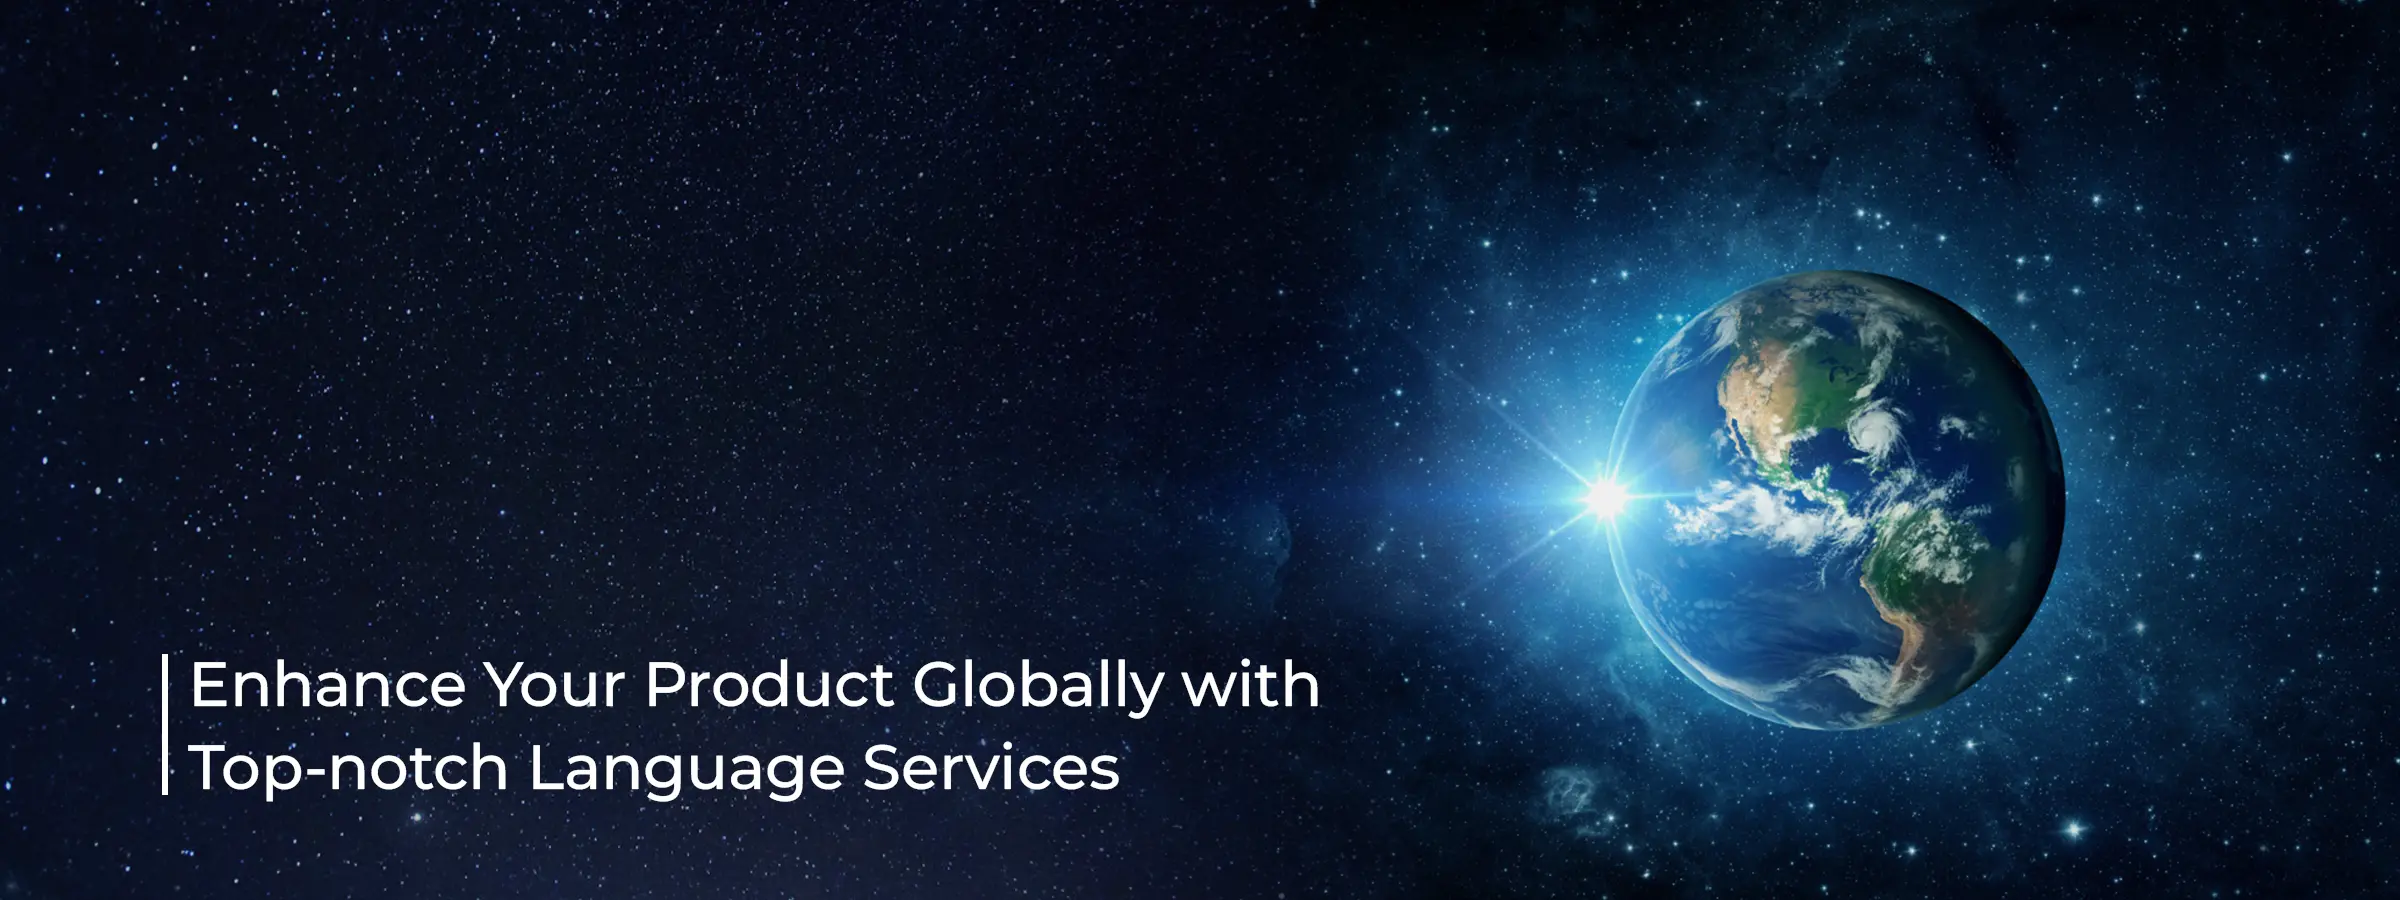 enhance-your-product-globally-with-top-notch-language-services